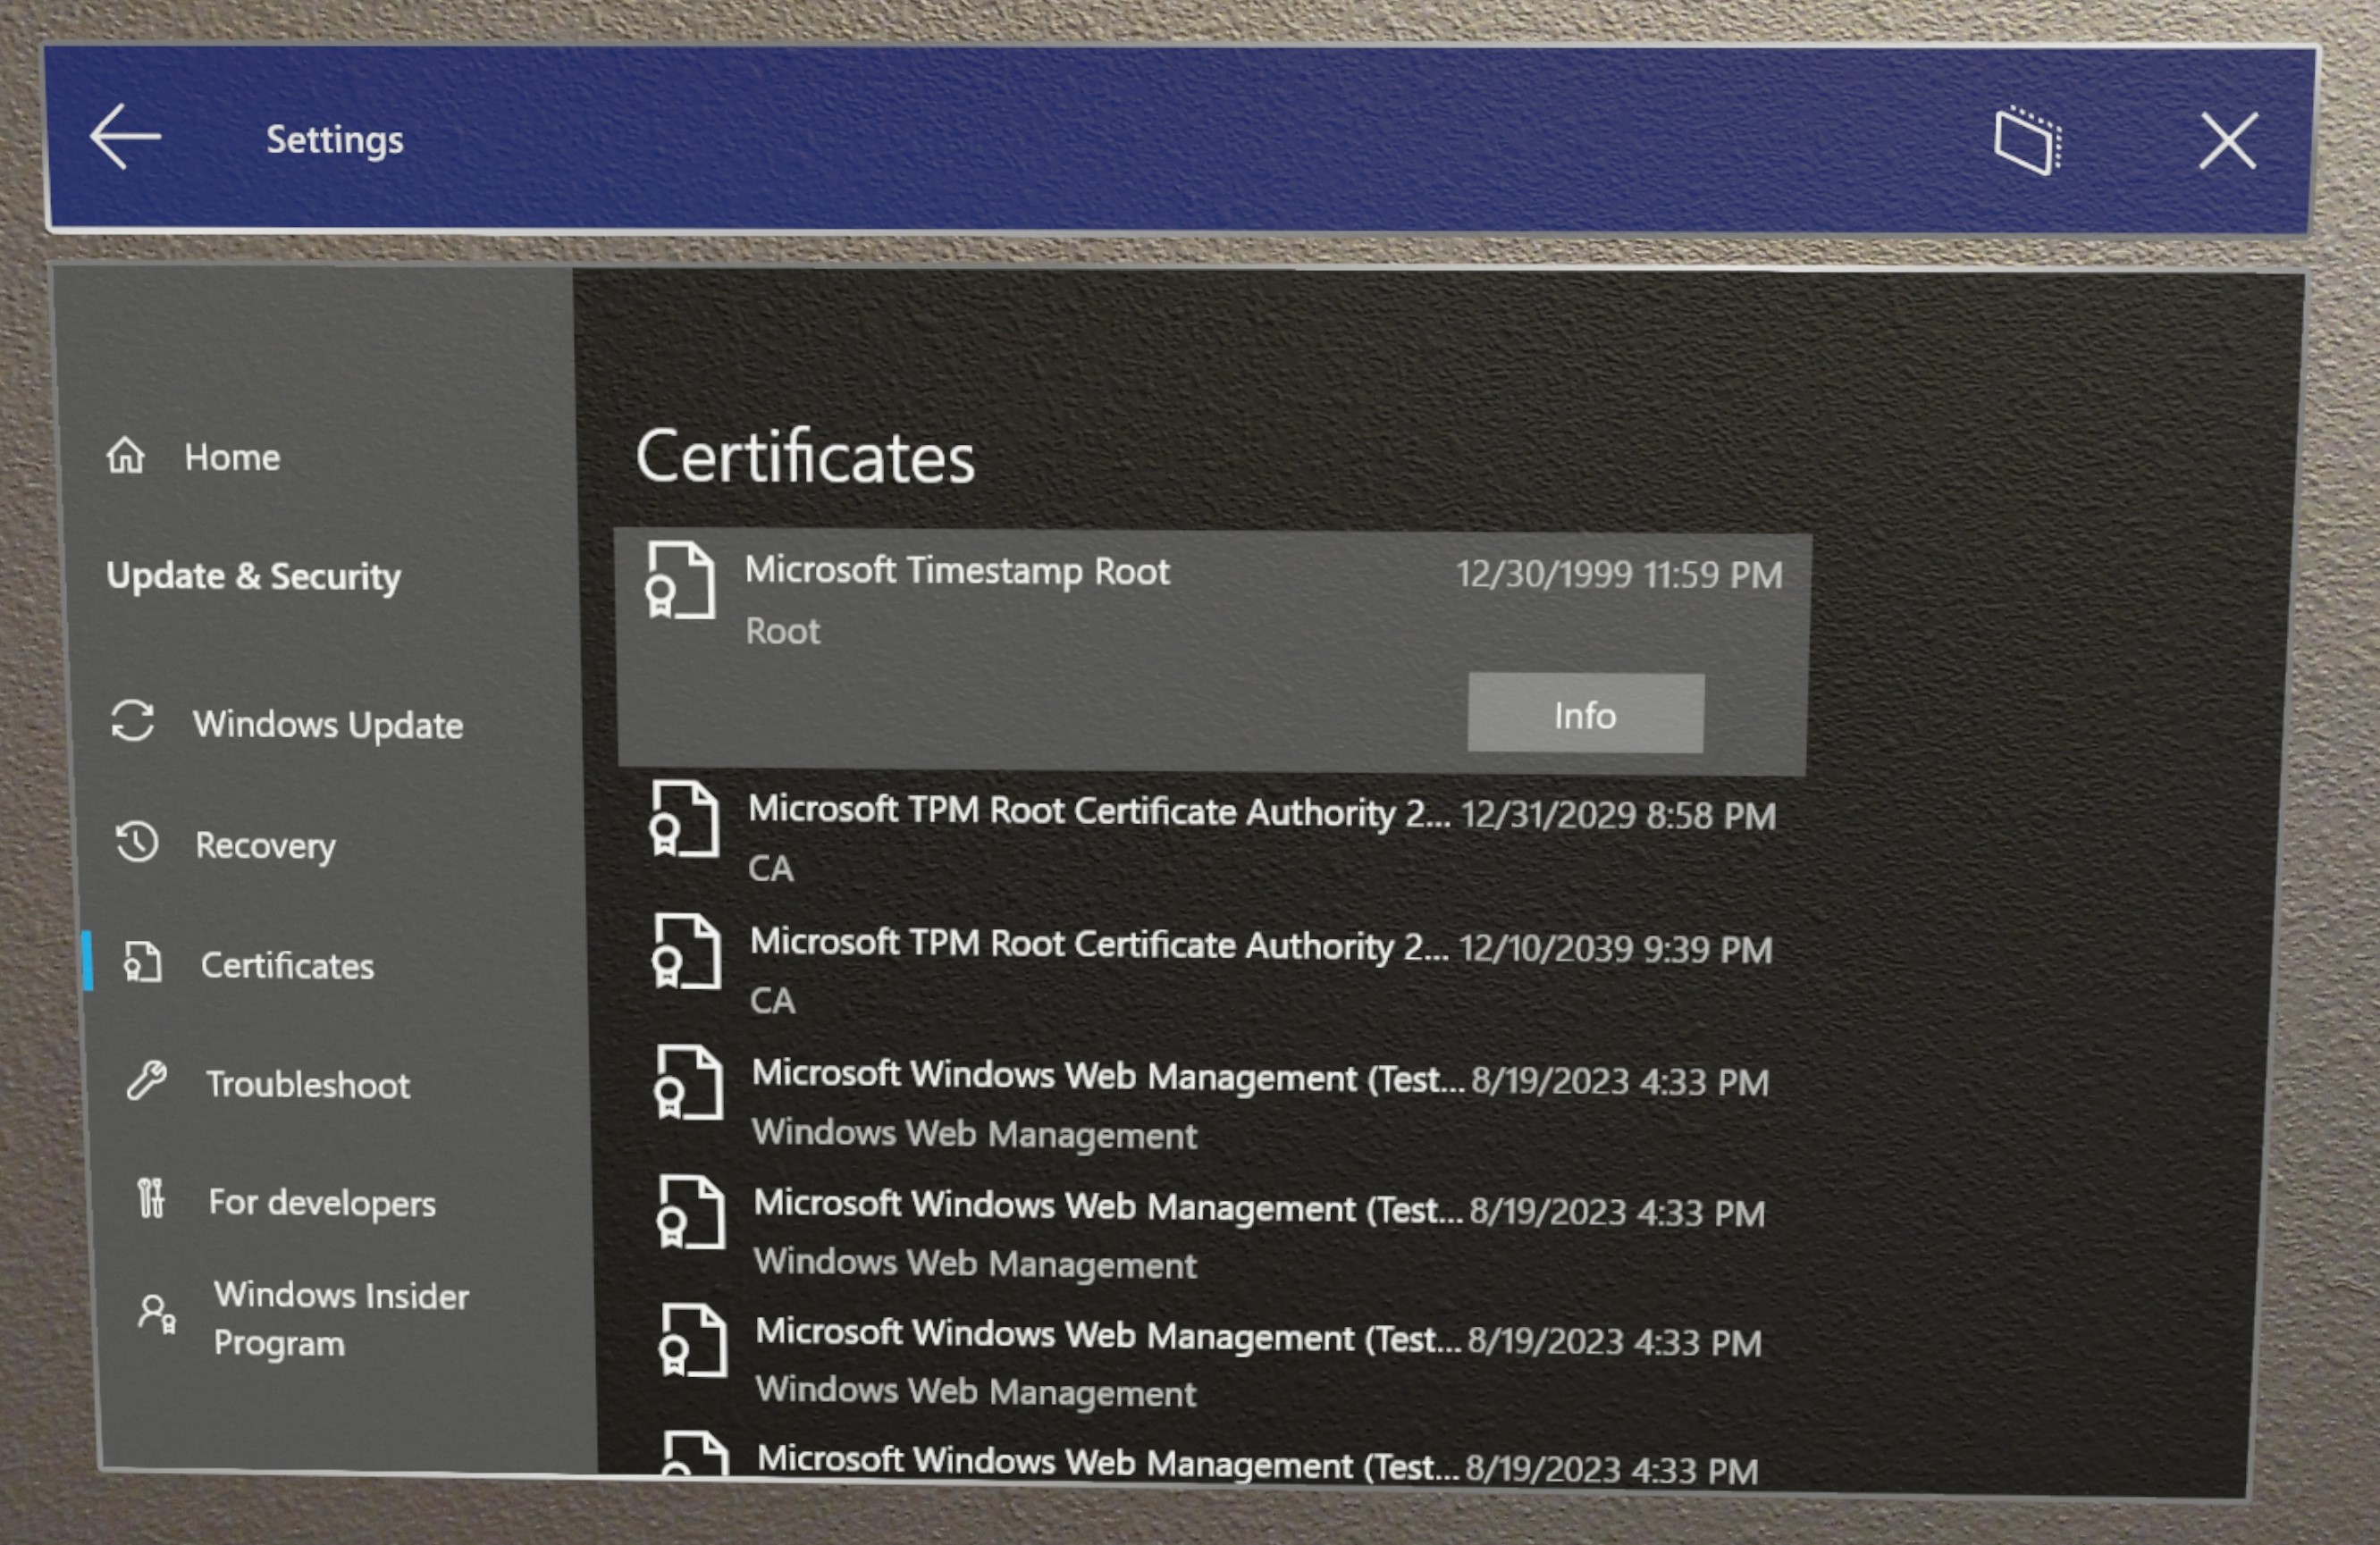 Certificate viewer in the Settings app under Certificates.